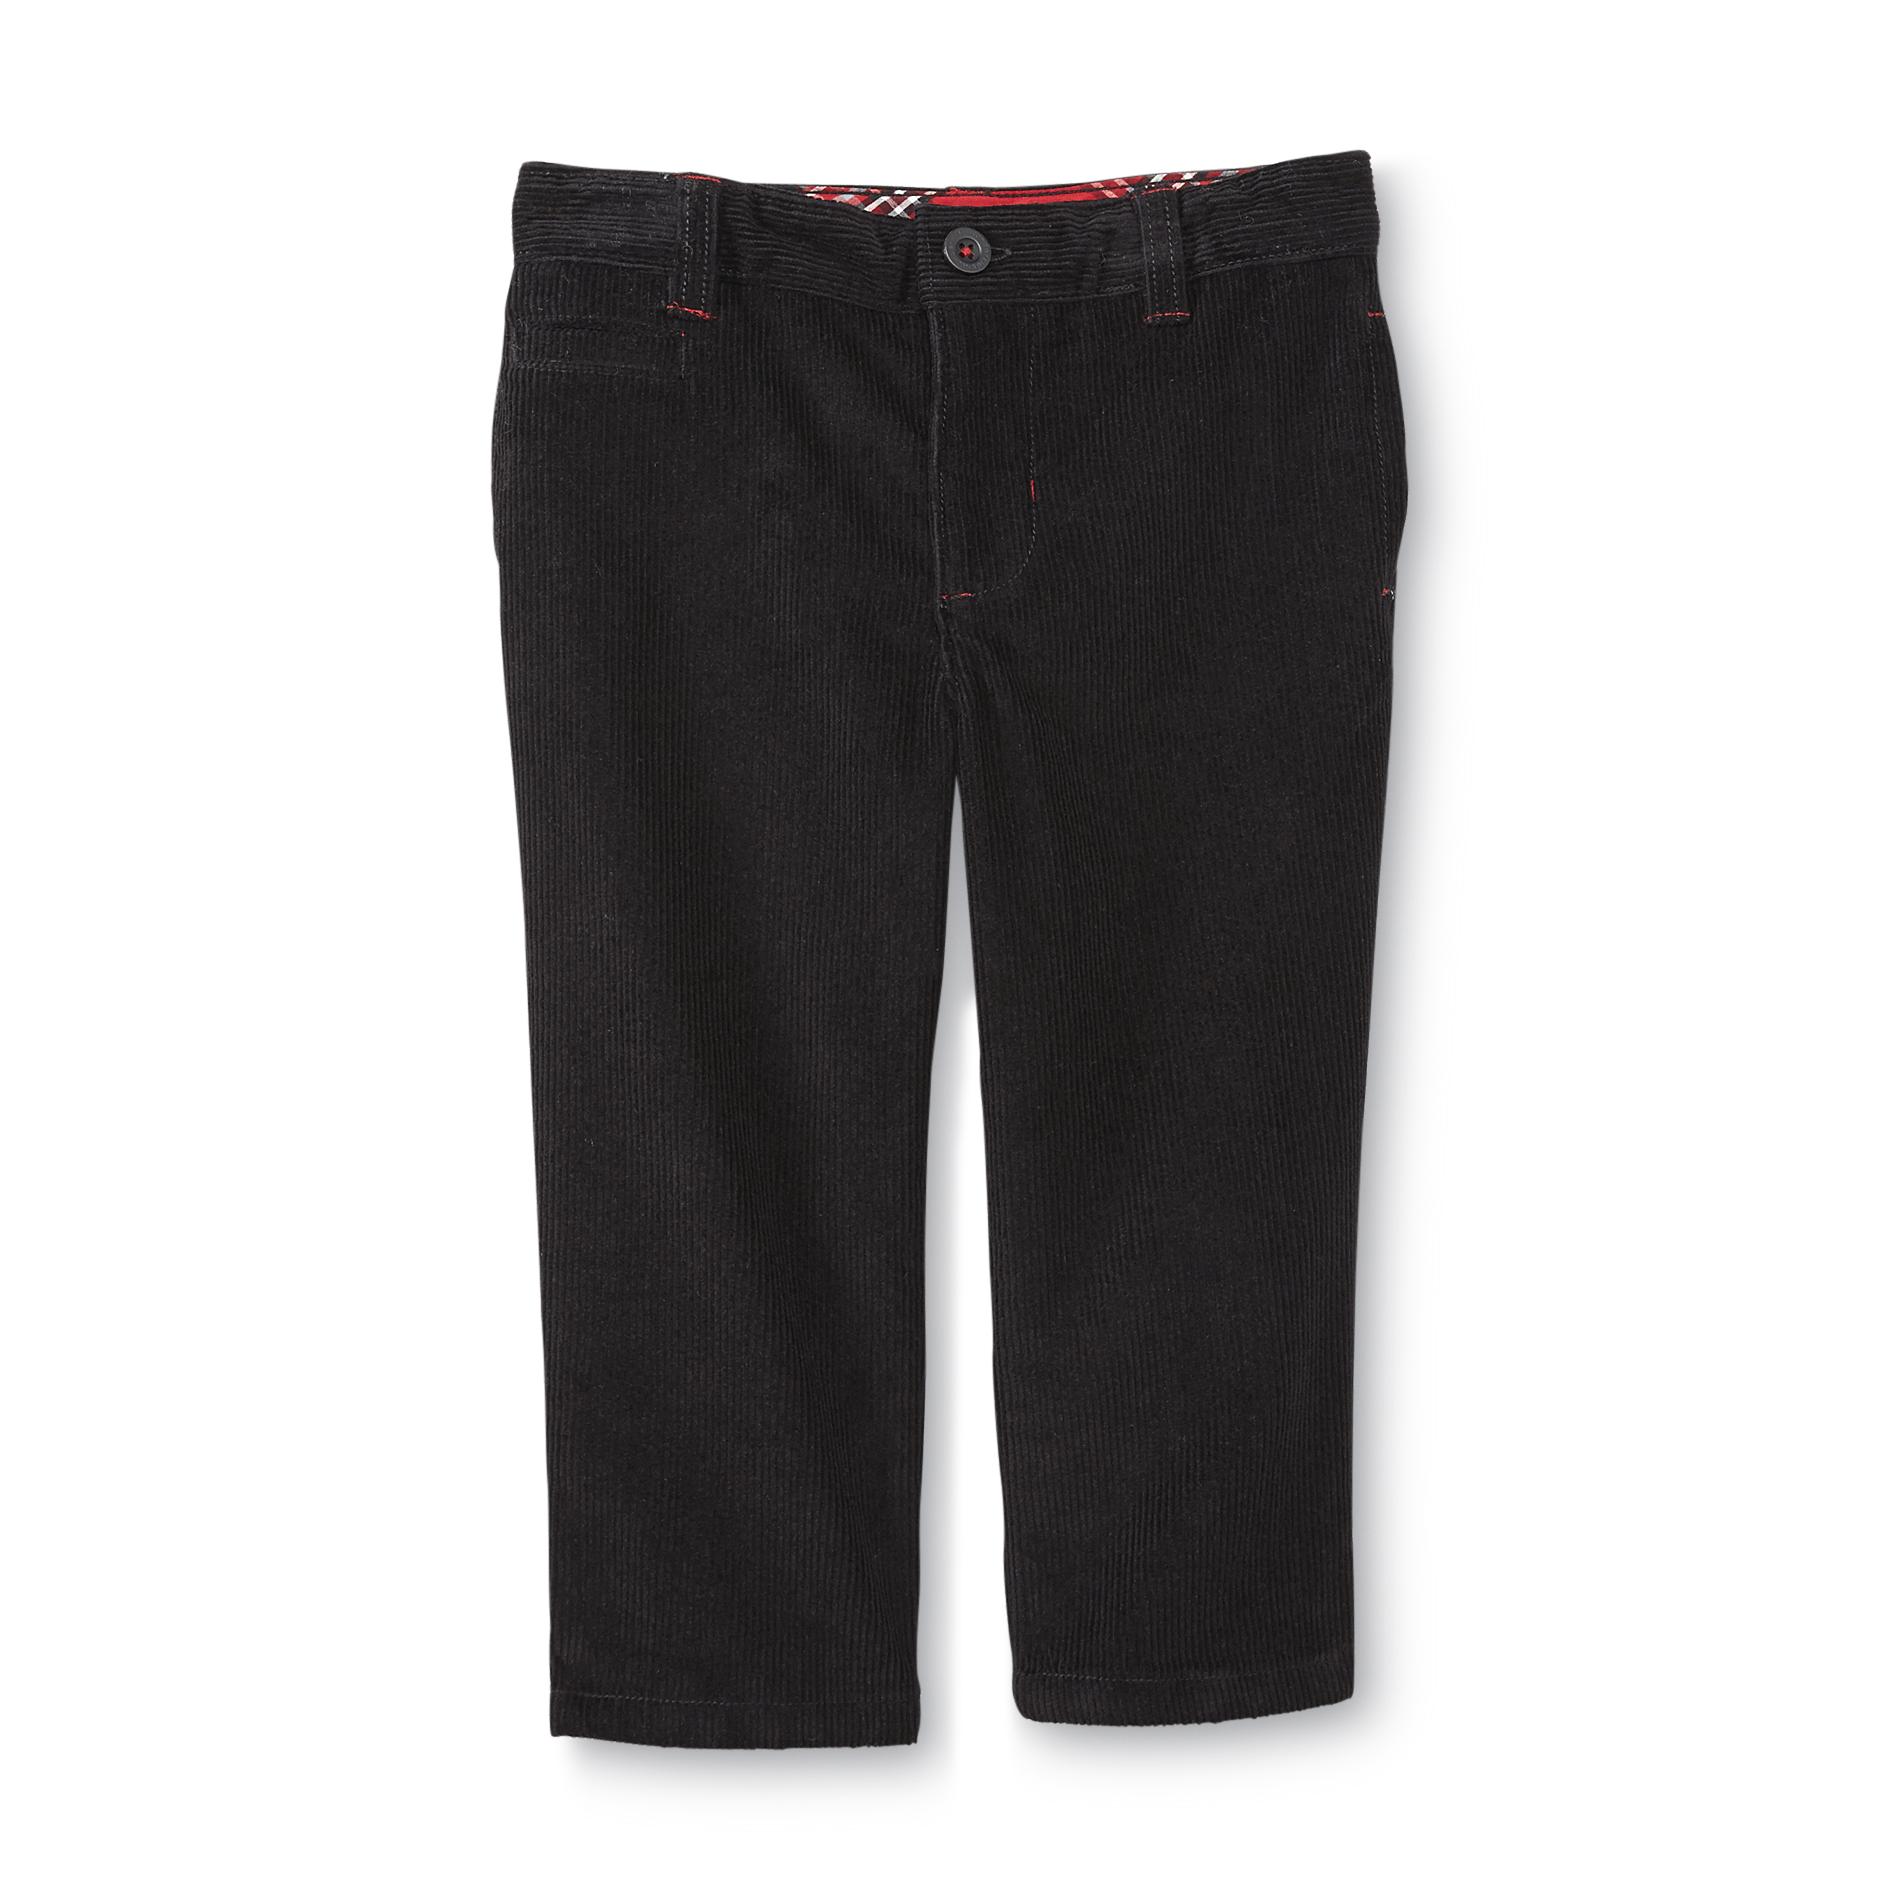 Holiday Editions Infant & Toddler Boy's Corduroy Pants